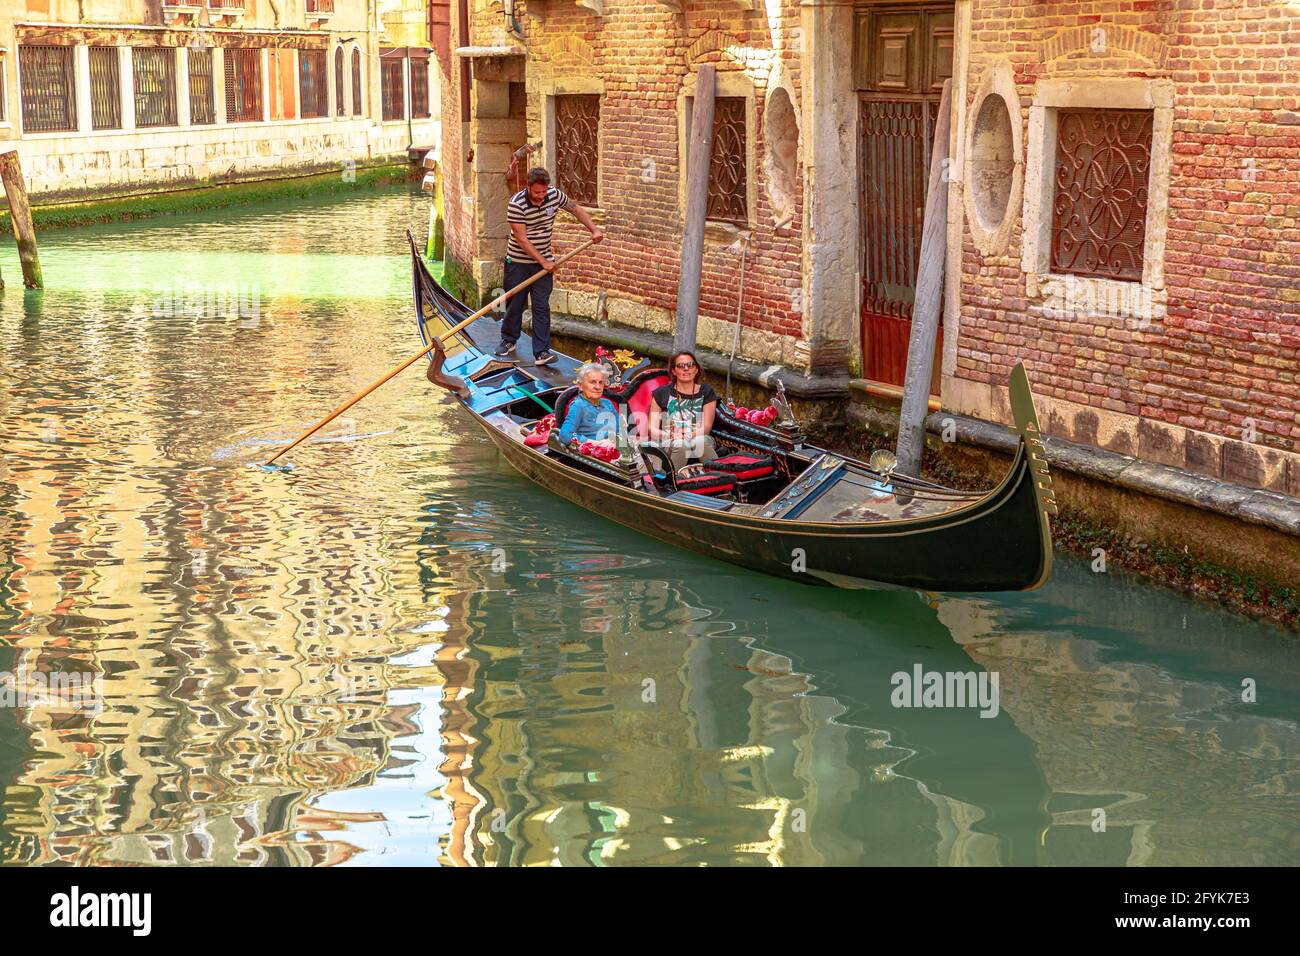 Venice, Italy - May 9, 2021: Traditional Gondoliers in Venice taking tourists on tour on historic Grand Canal of city. People with mask for Stock Photo